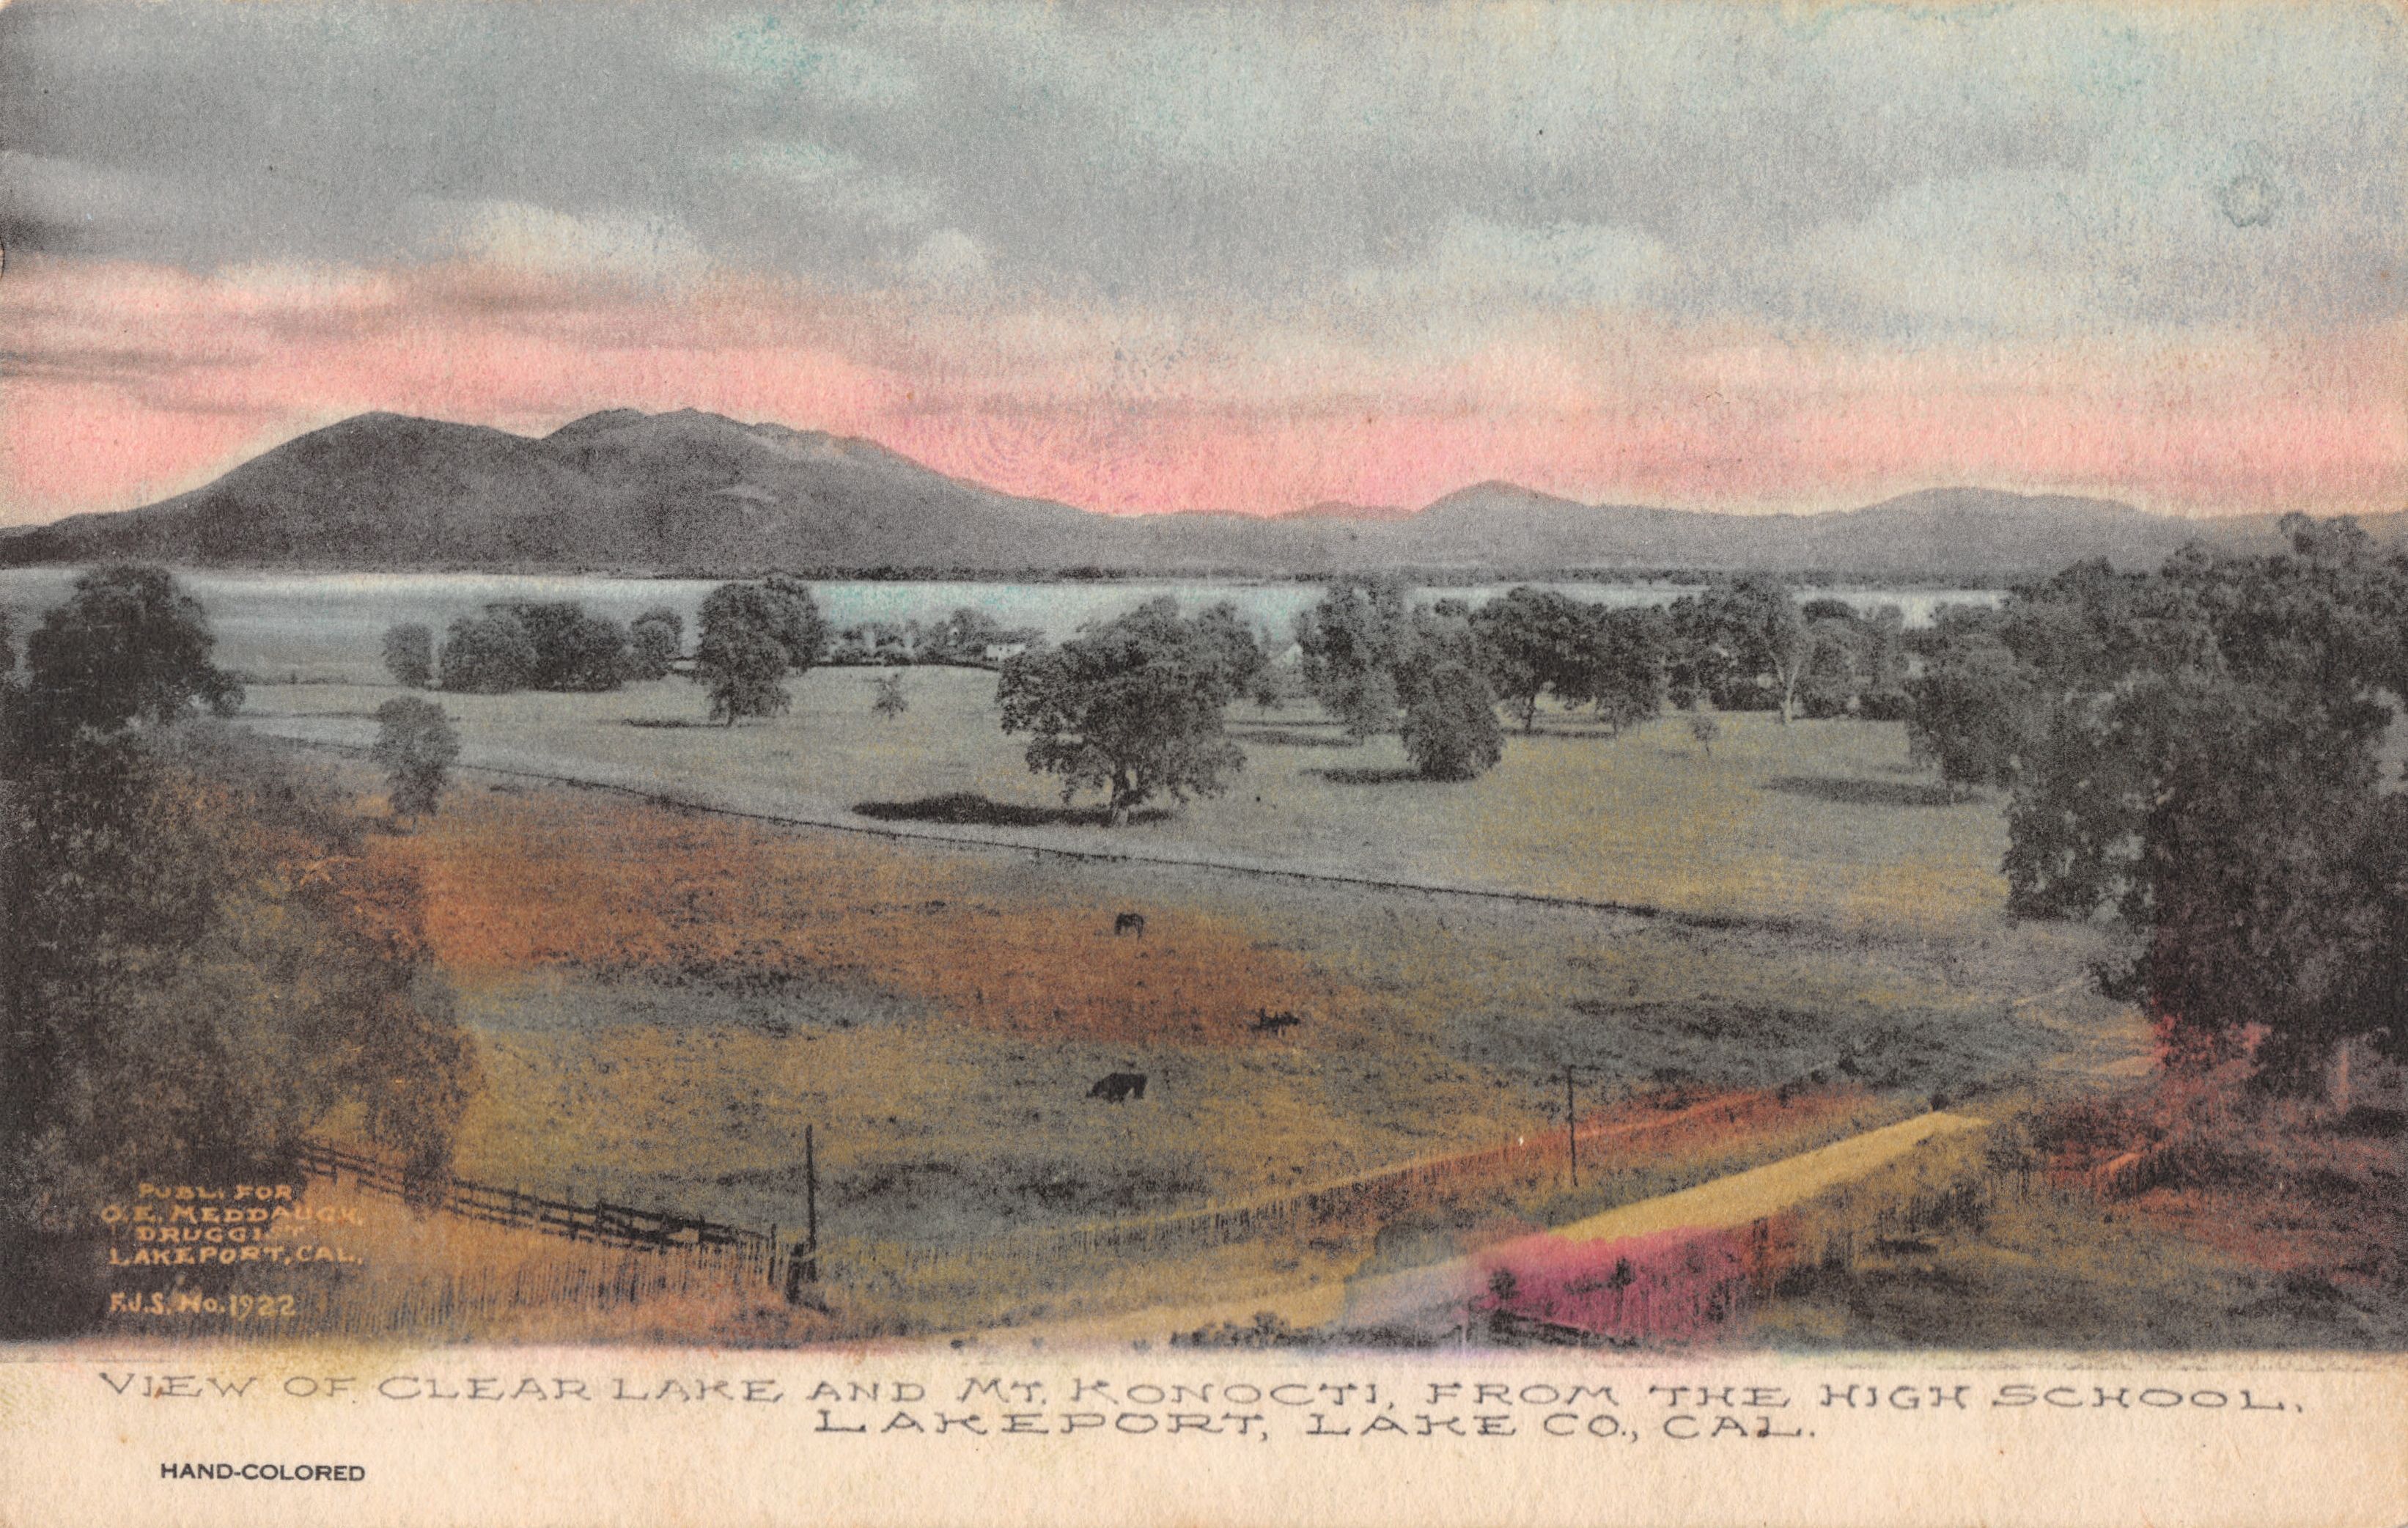 _Konocti & Clear Lake from High School Hand Colored 1907 EDIT